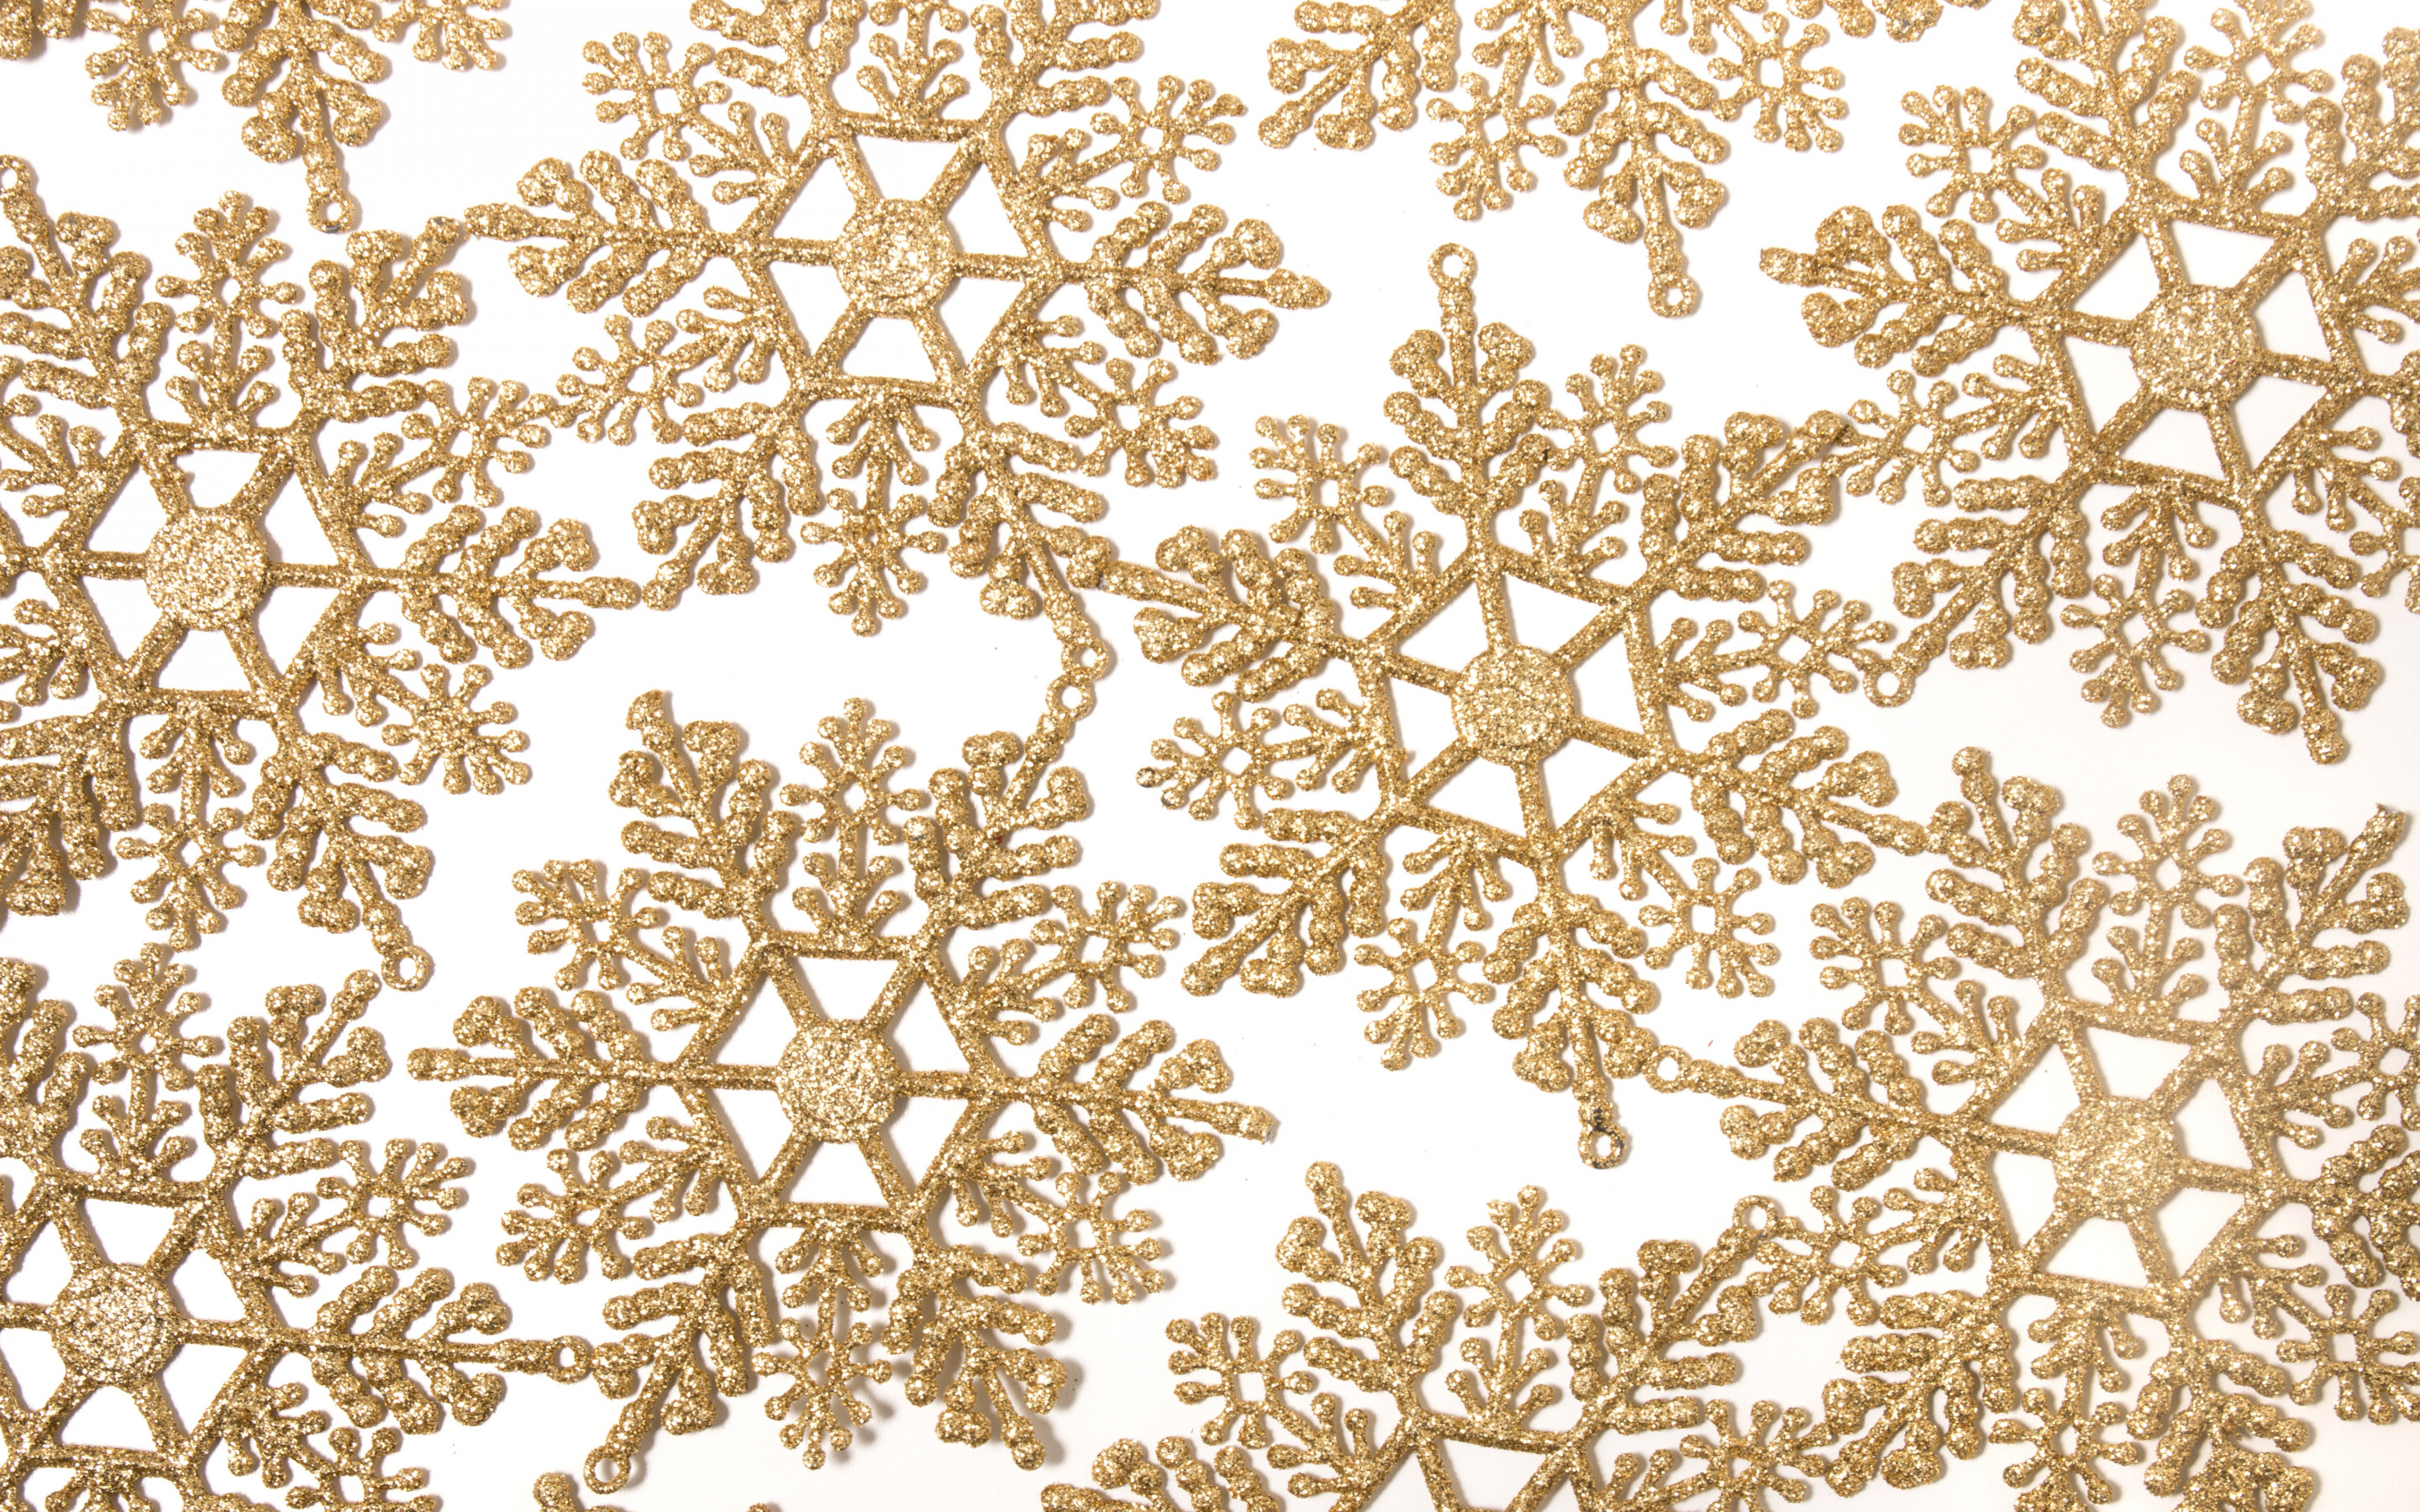 Download wallpaper golden snowflakes, texture with snowflakes, winter texture, white background, winter background, snowflakes for desktop with resolution 2880x1800. High Quality HD picture wallpaper